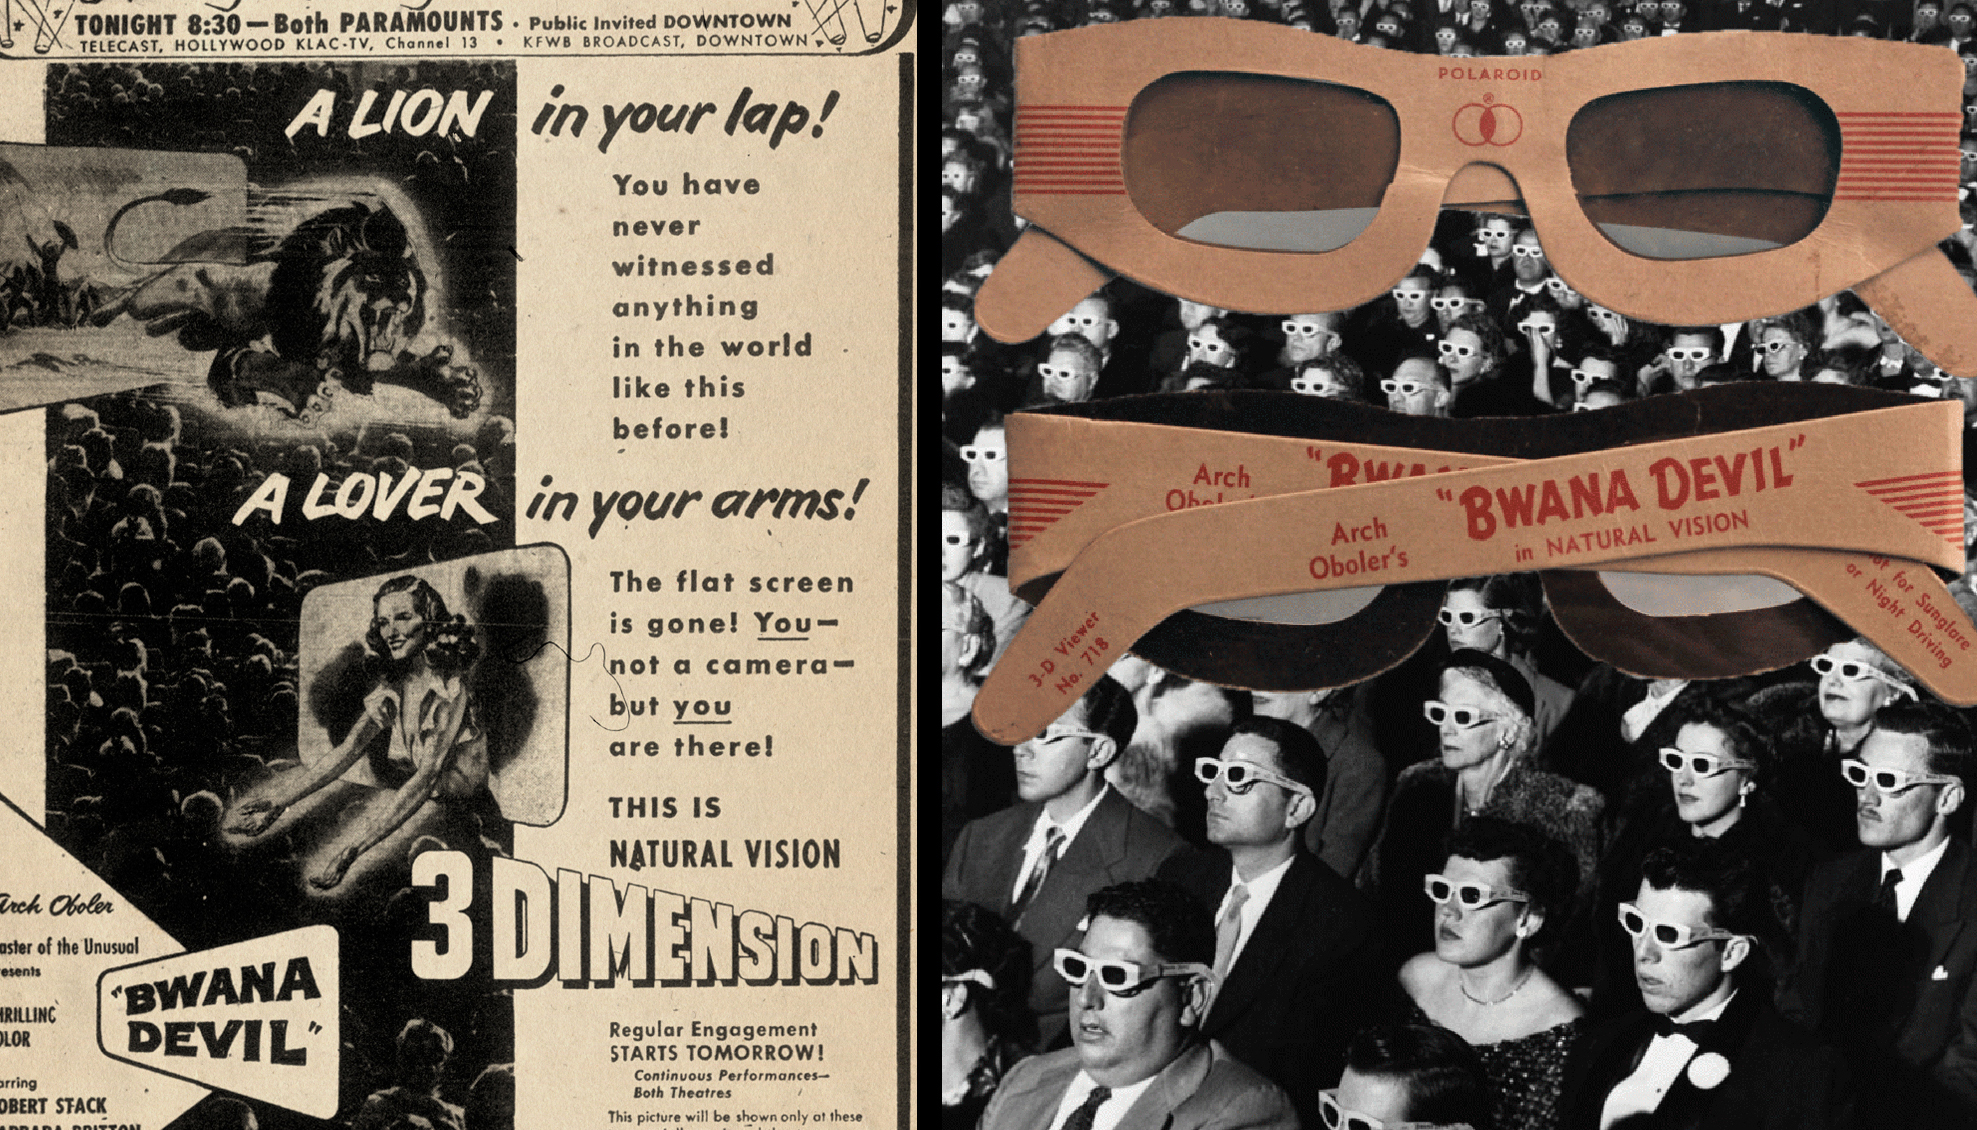 An advertisement for Bwana Devil is shown on the left with an image of an audience from 1952 wearing 3D glasses on the right.